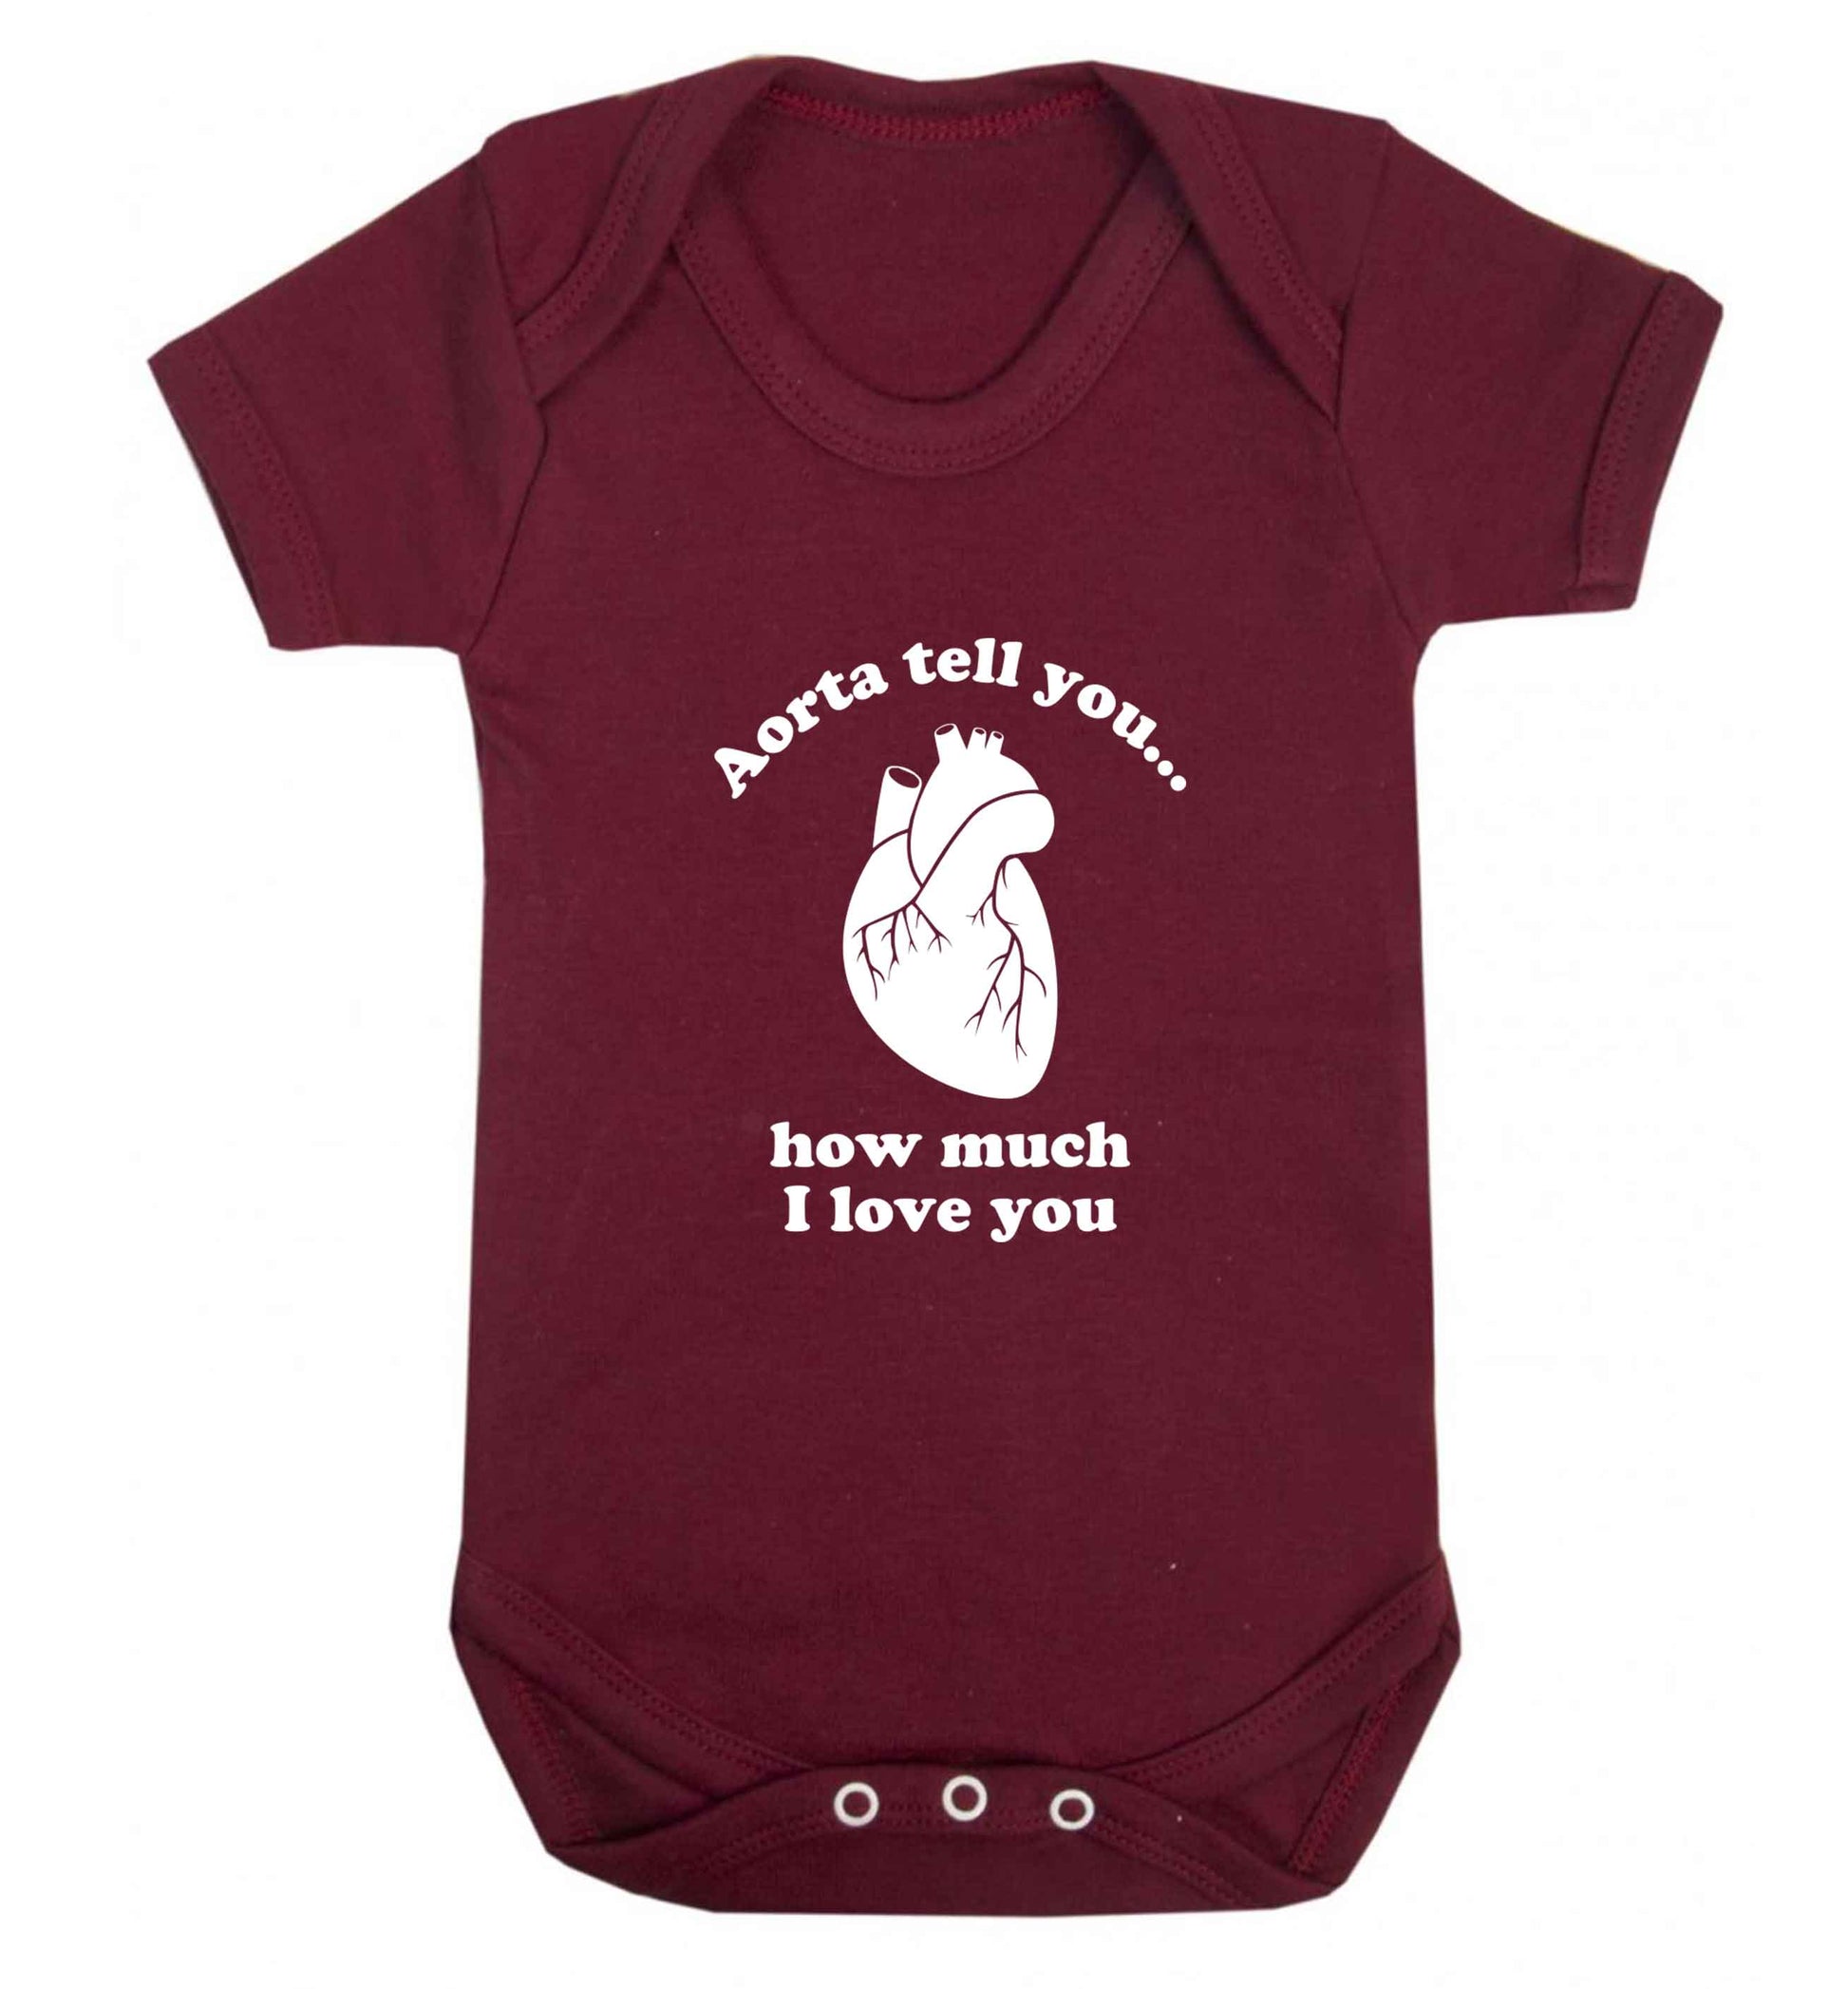 Aorta tell you how much I love you baby vest maroon 18-24 months